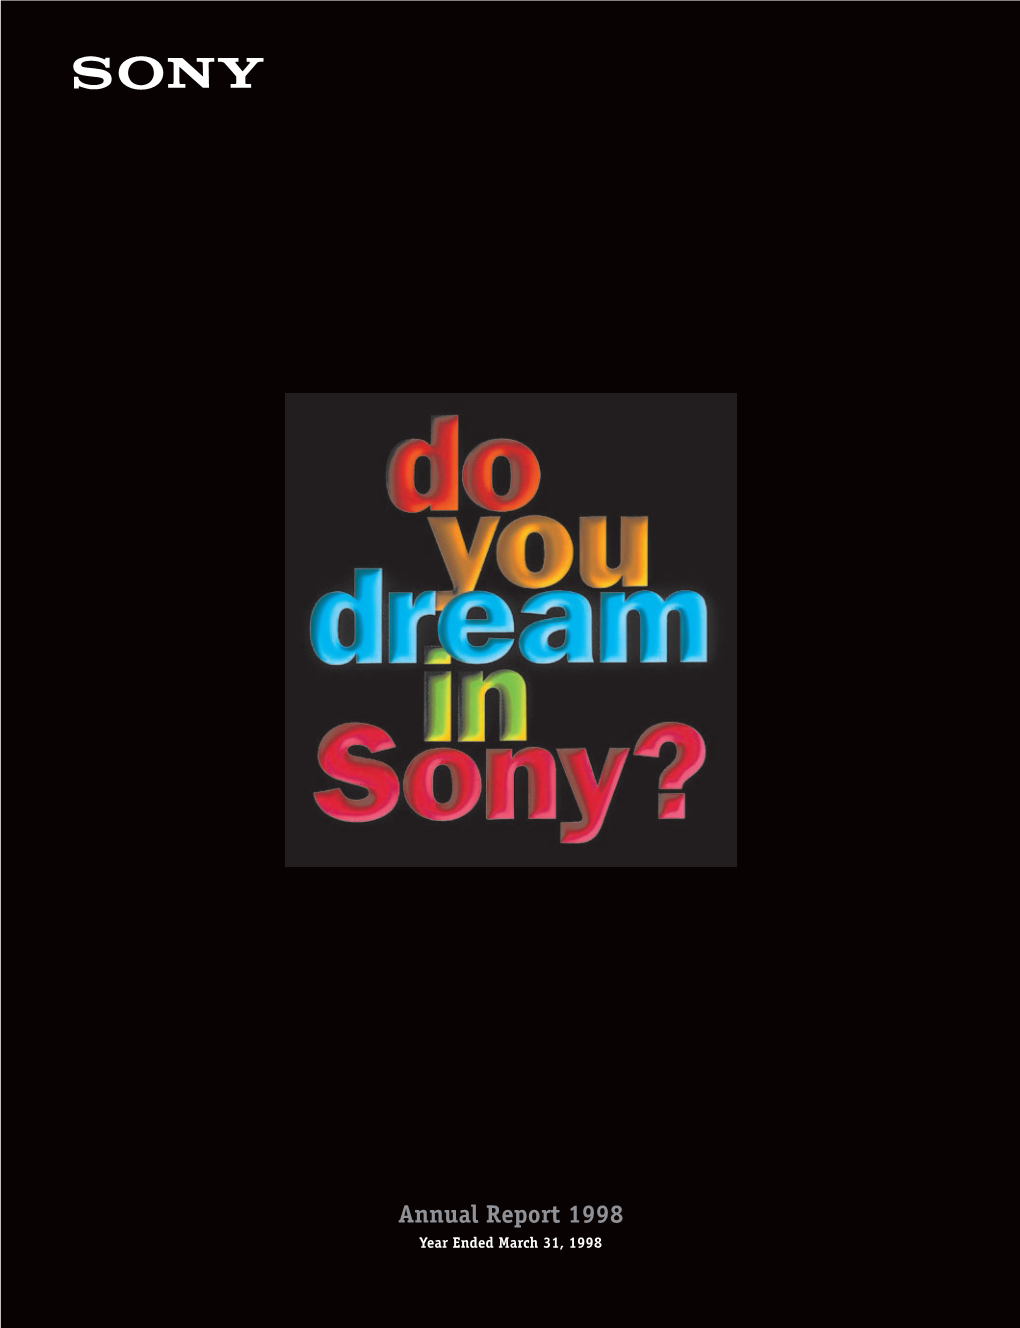 Annual Report 1998 Year Ended March 31, 1998 Sony Is a Company Devoted to the Celebration of Life